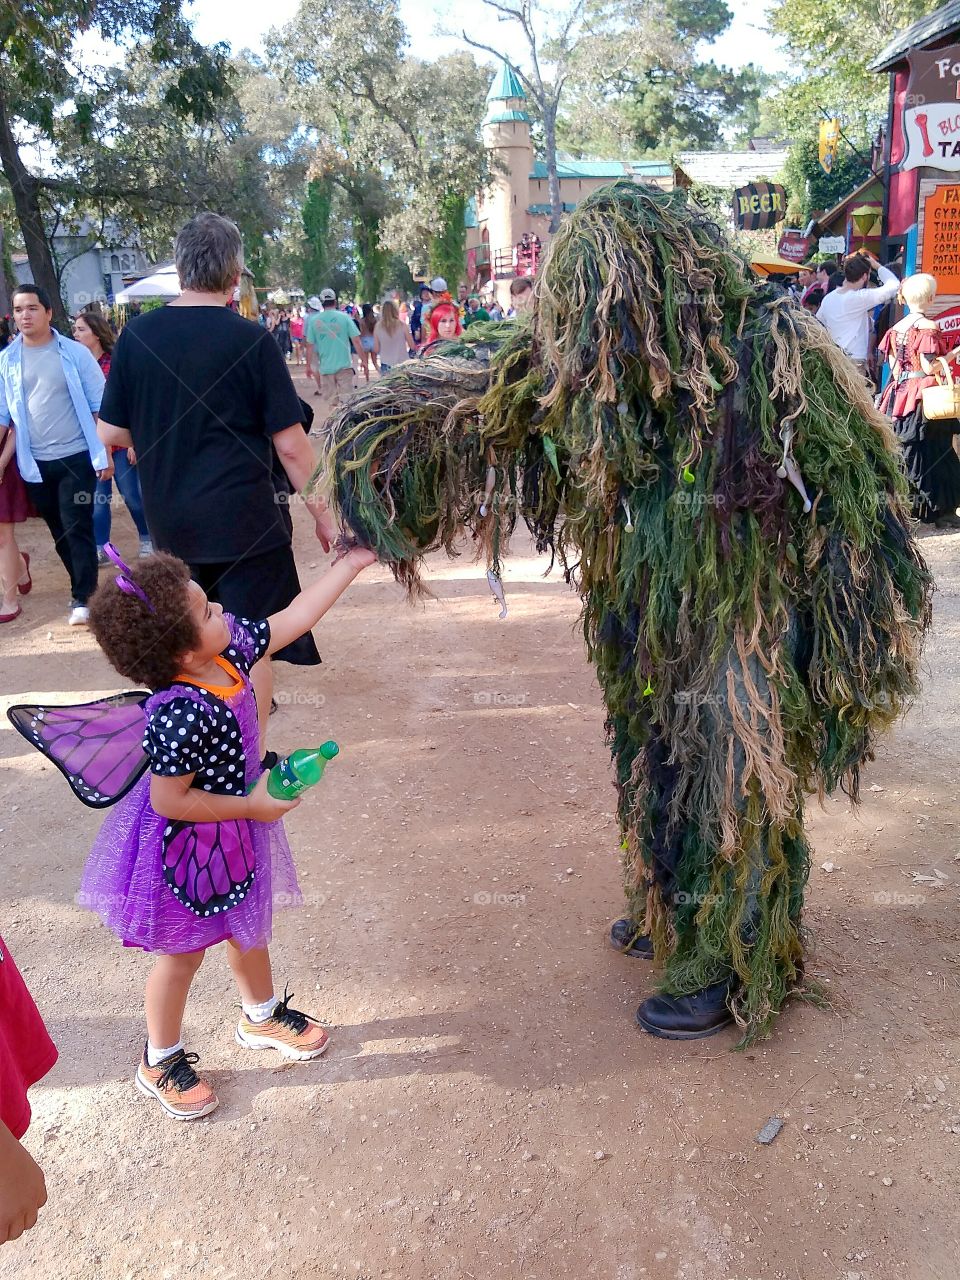 Instant Friendship between girl  and Swamp Thing.